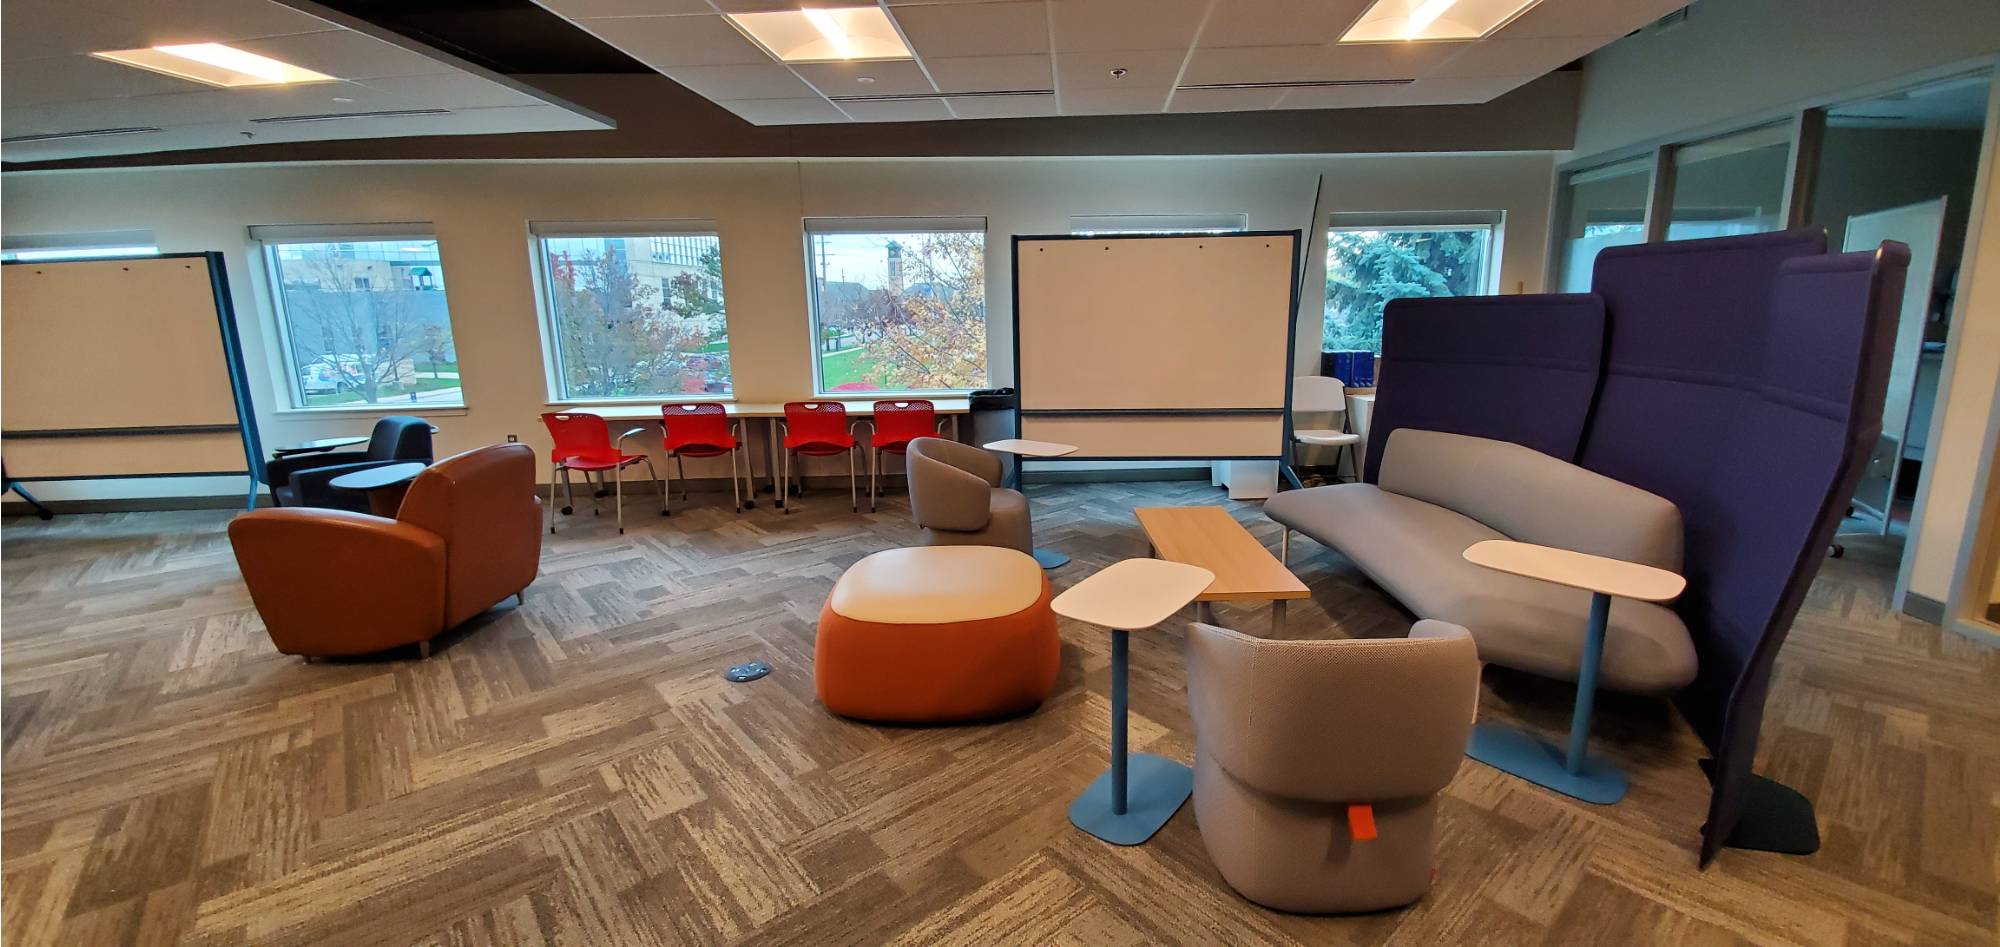 seating view of the student/faculty collaboration area